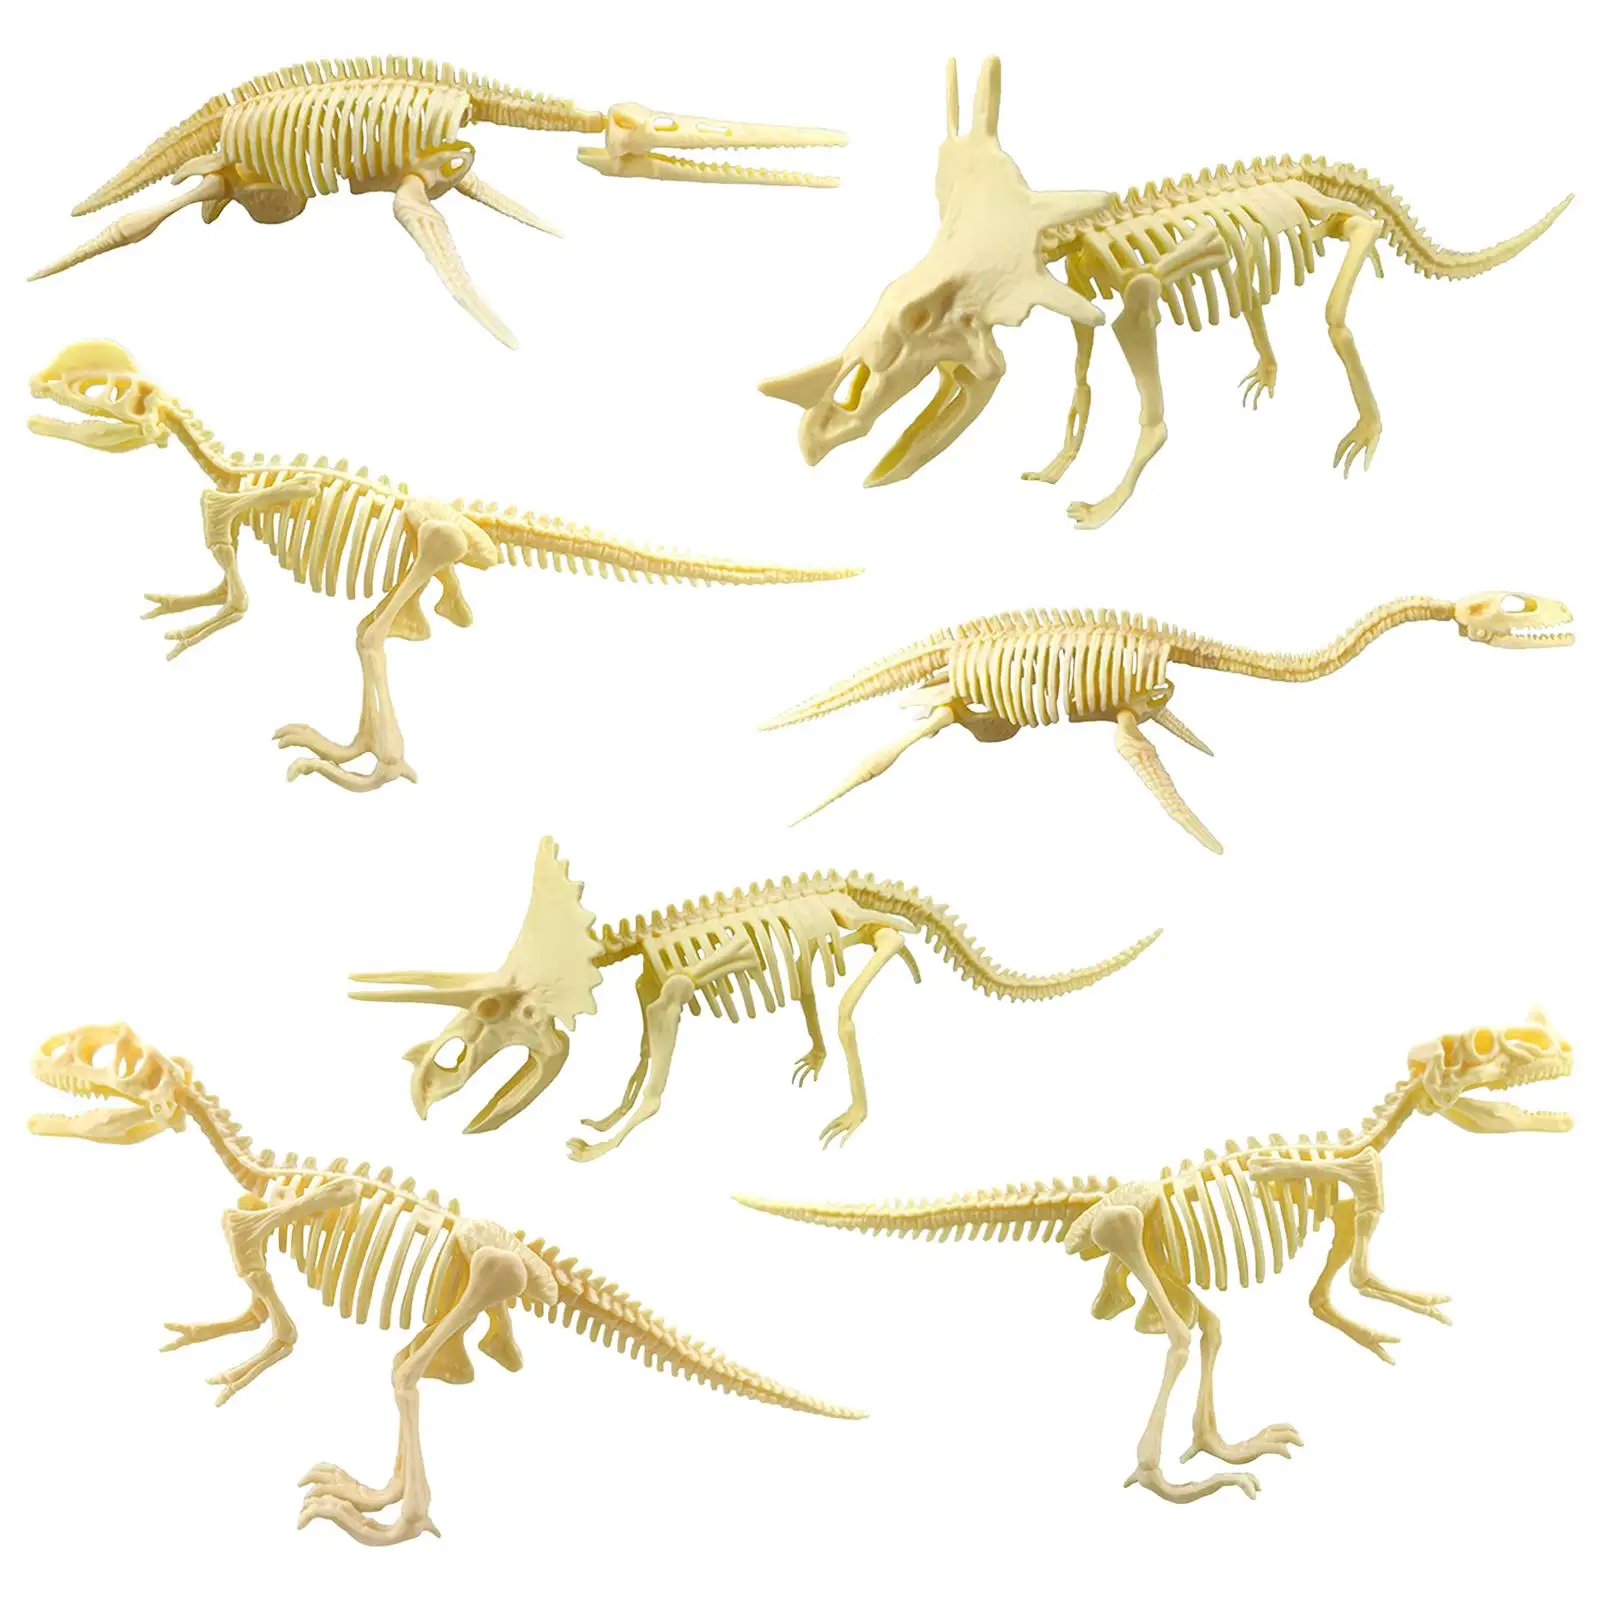 7 Pieces Simulation Dinosaur Skeleton Carfts Collection Party Favor Assorted Bones Figures Toys Model Toys for Children Gifts